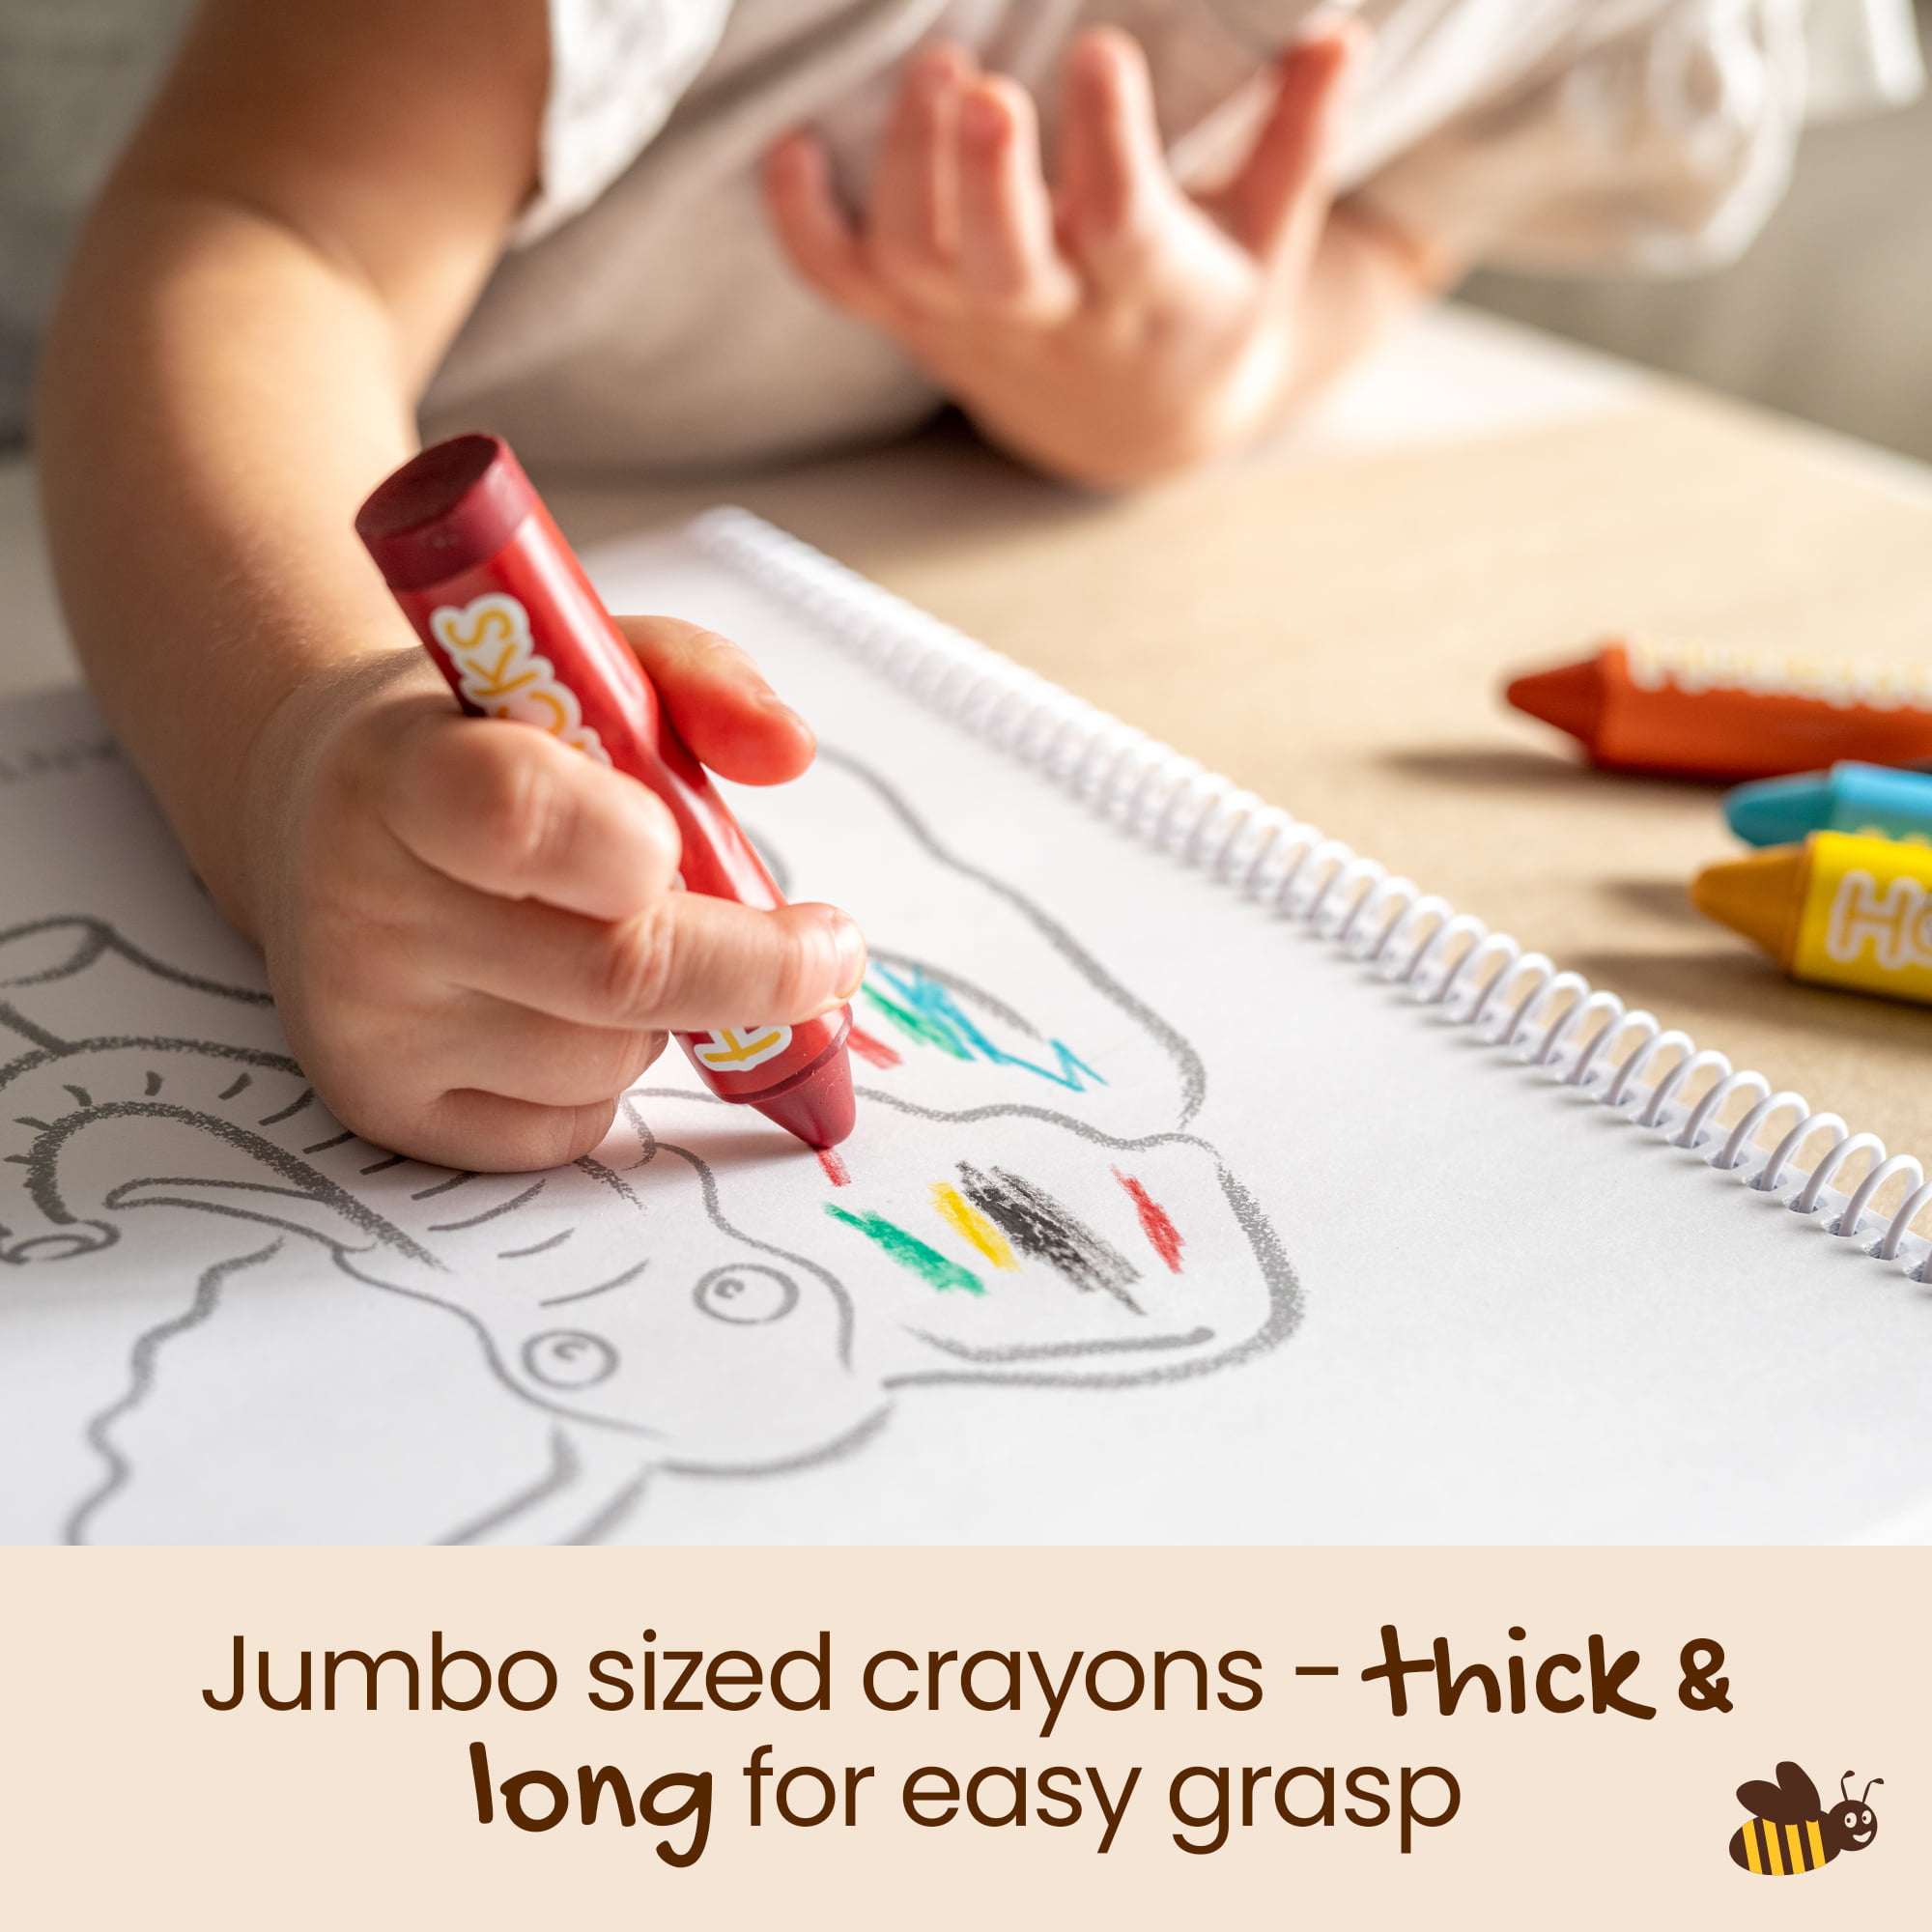 Honeysticks Jumbo Crayons (8 Pack) - Non Toxic Crayons for Kids - 100% Pure  Beeswax and Food Grade Colors - 8 Bright Colors - Large Crayons, Easy to